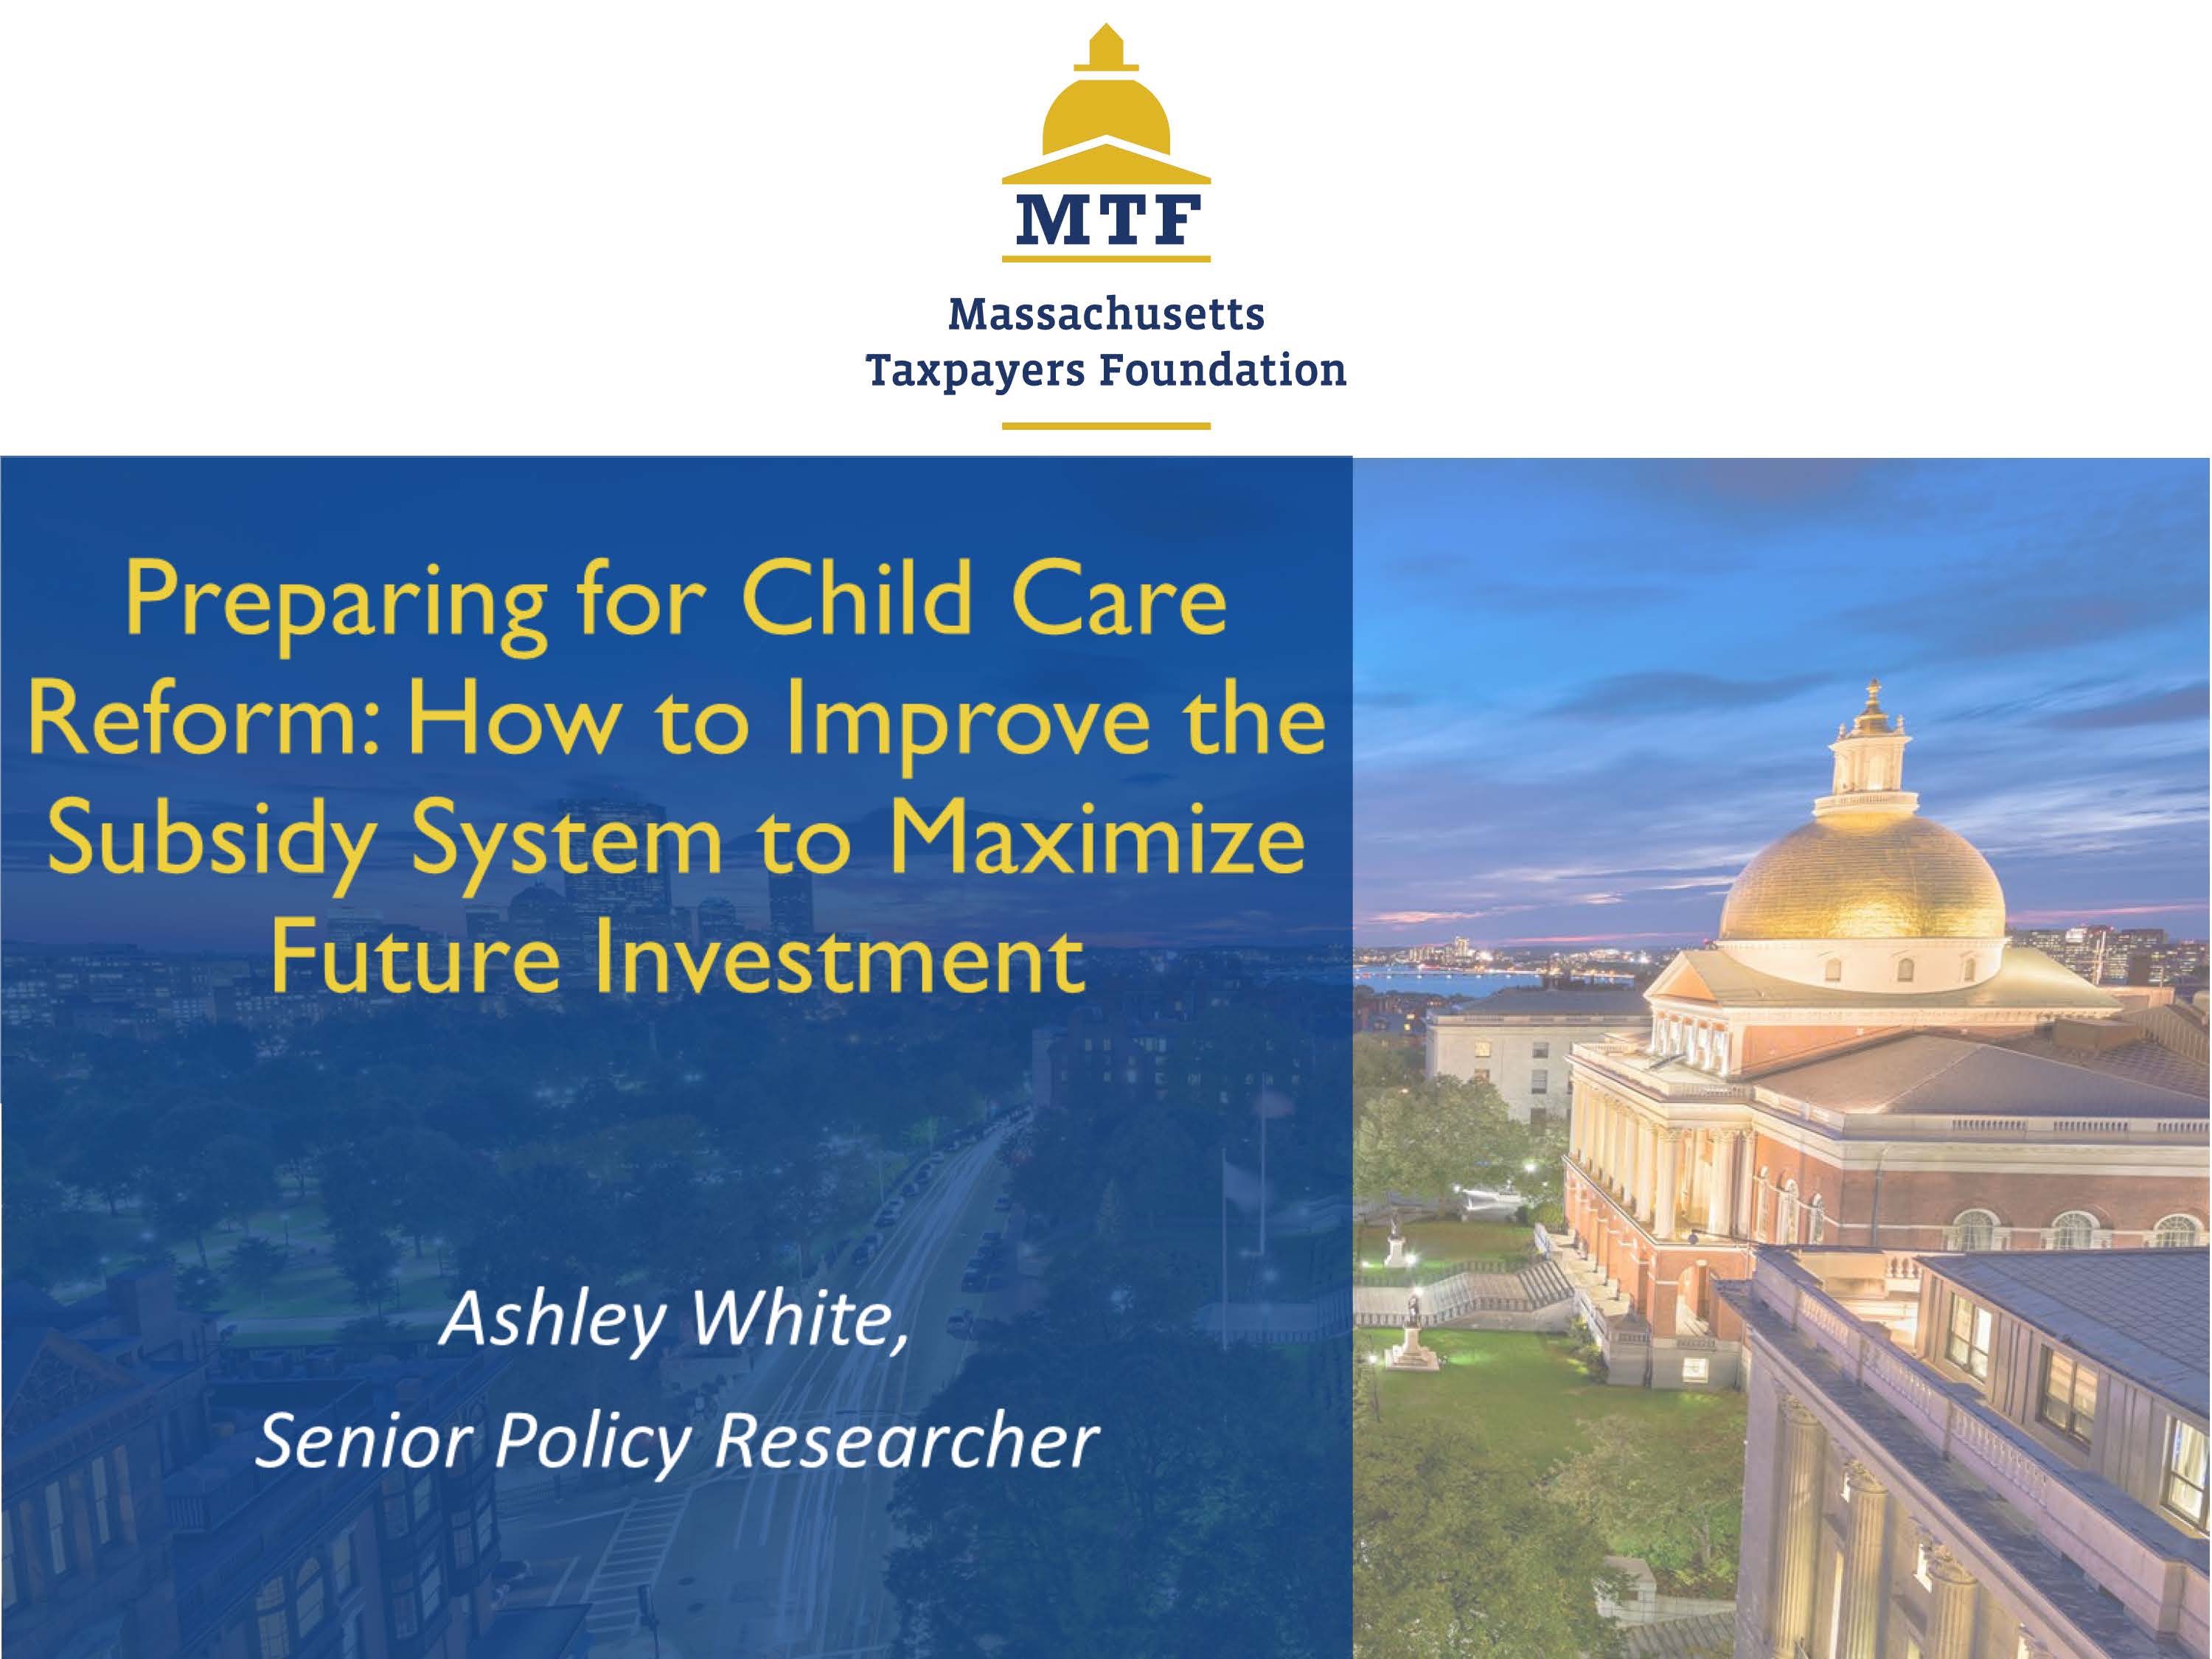 Title slide for research presentation. Preparing for Child care Reform: How to Improve the Subsidy System to Maximize Future Investment. Ashley White, Senior Policy Researcher. Massachusetts Taxpayers Foundation.